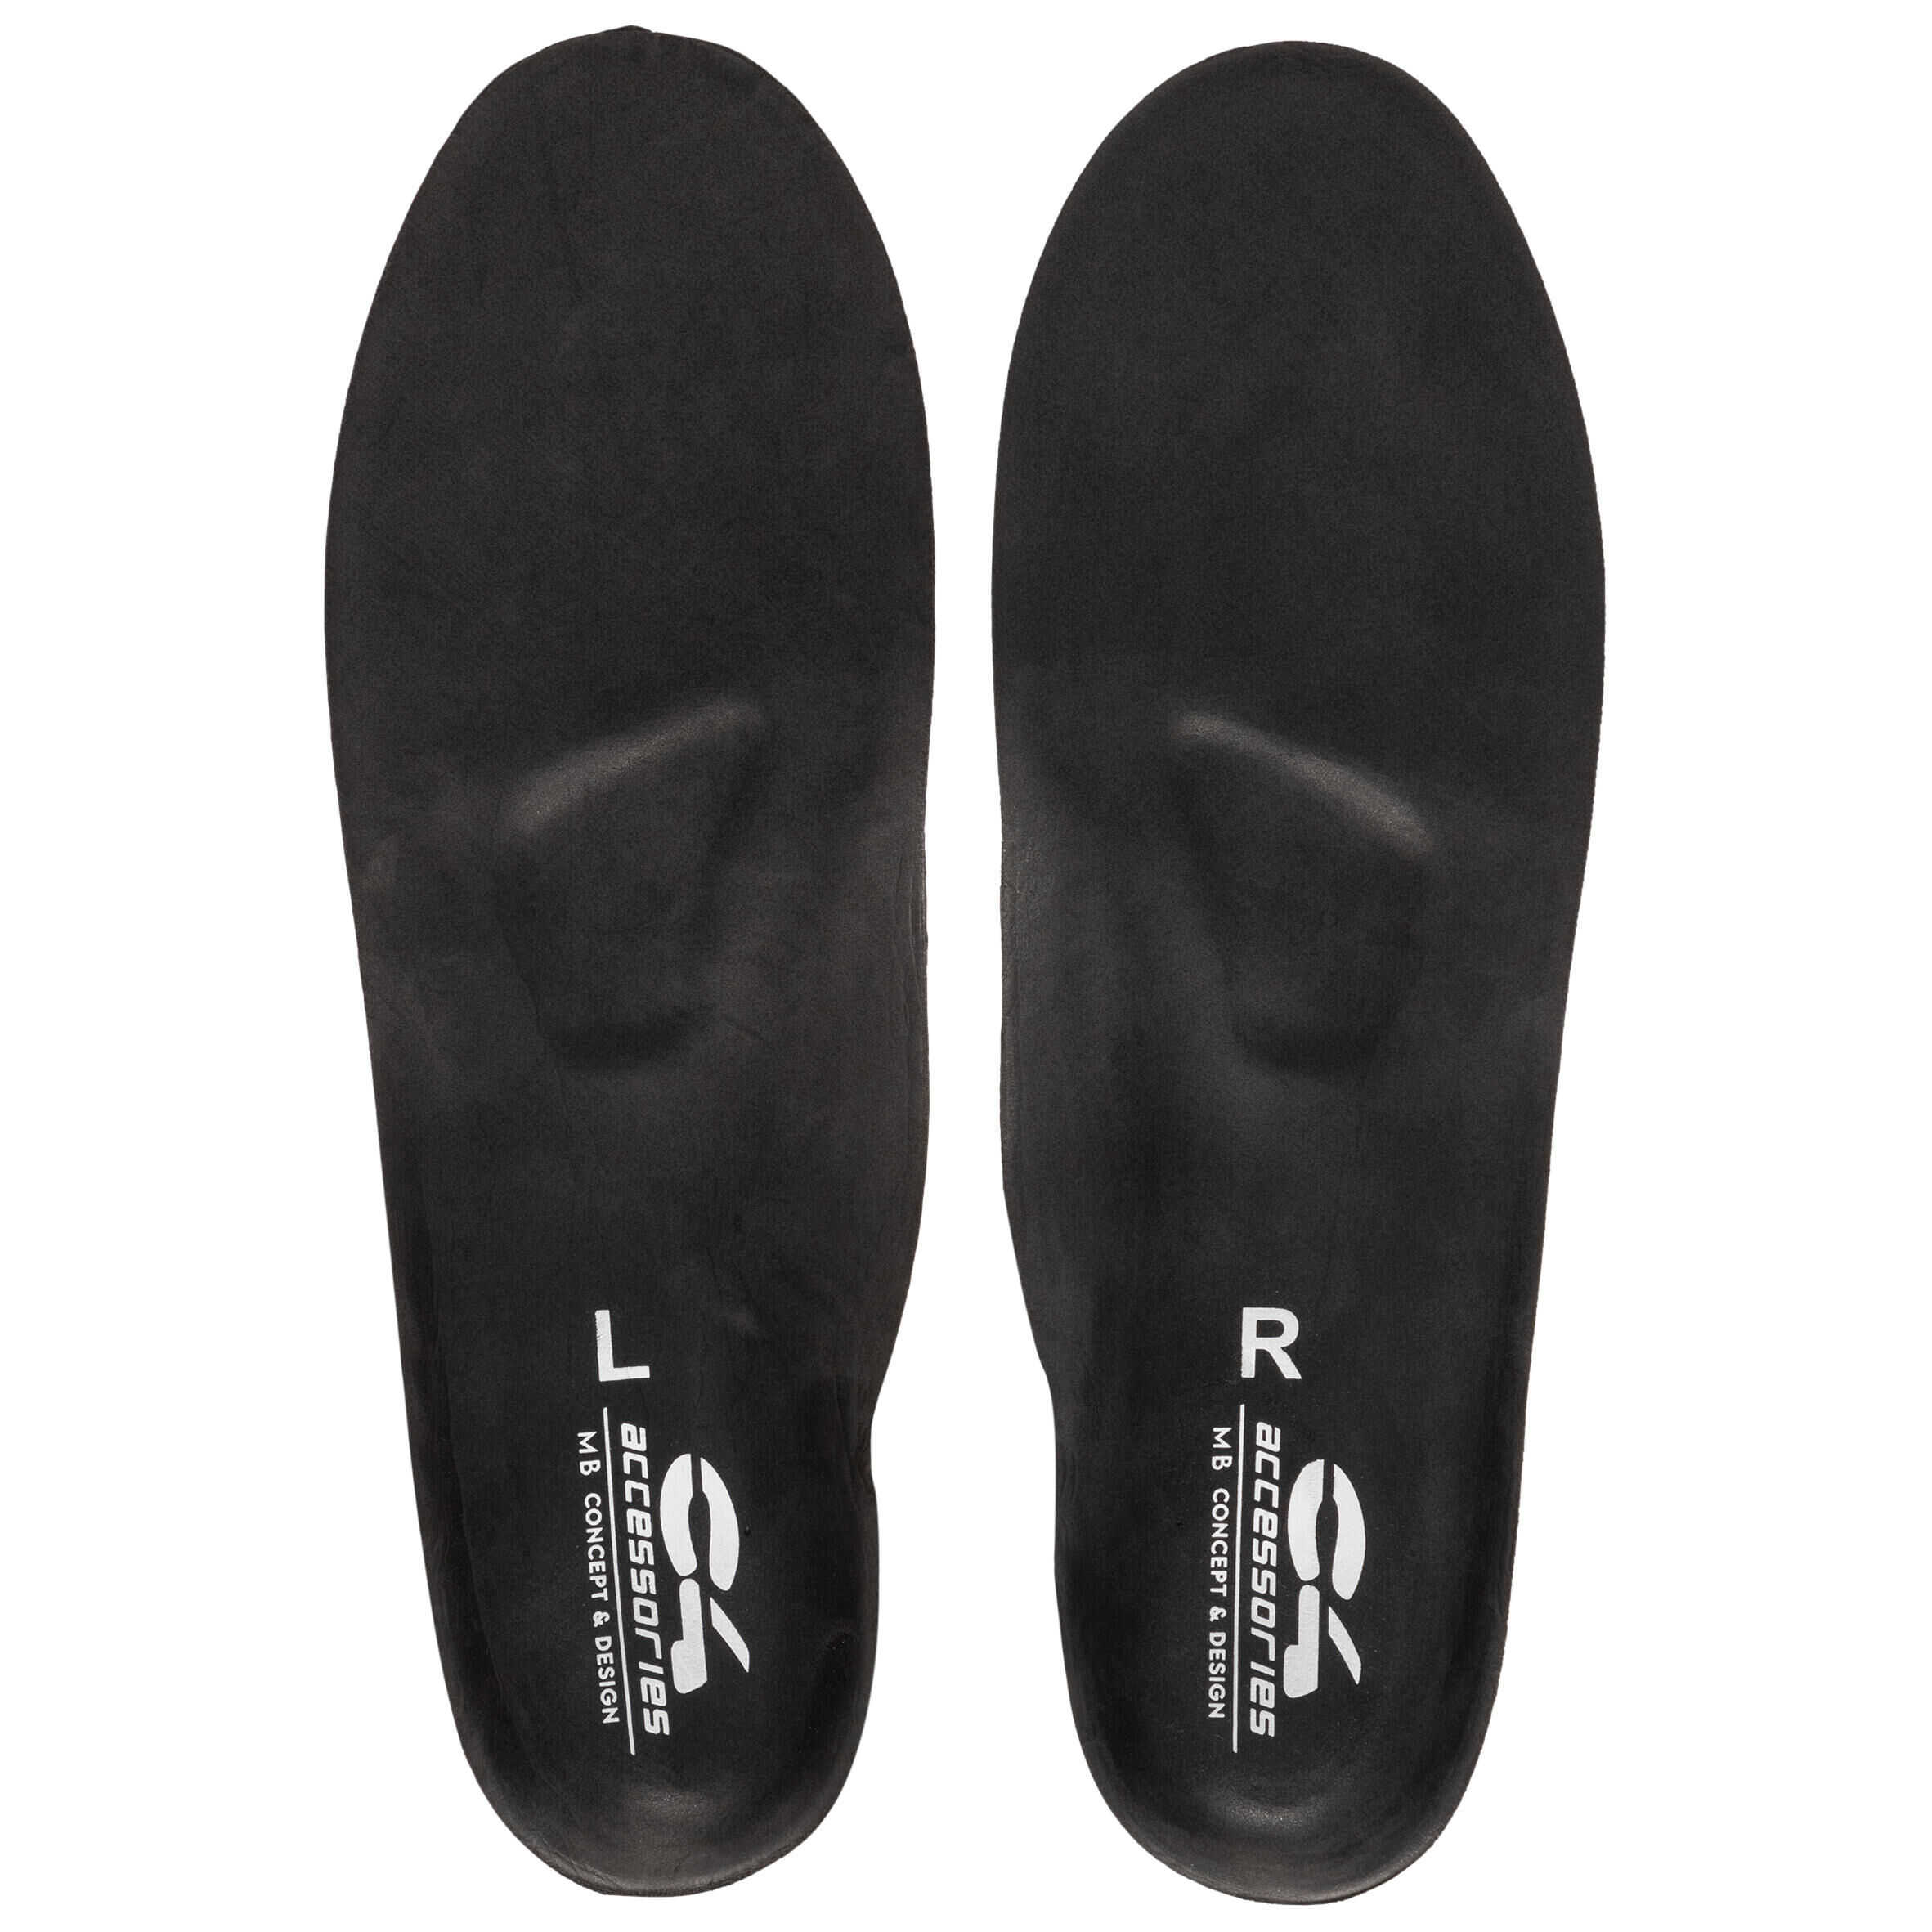 C4 CARBON ANATOMIC SOLES C4 CARBON FOR SPEARFISHING AND FREEDIVING FINS